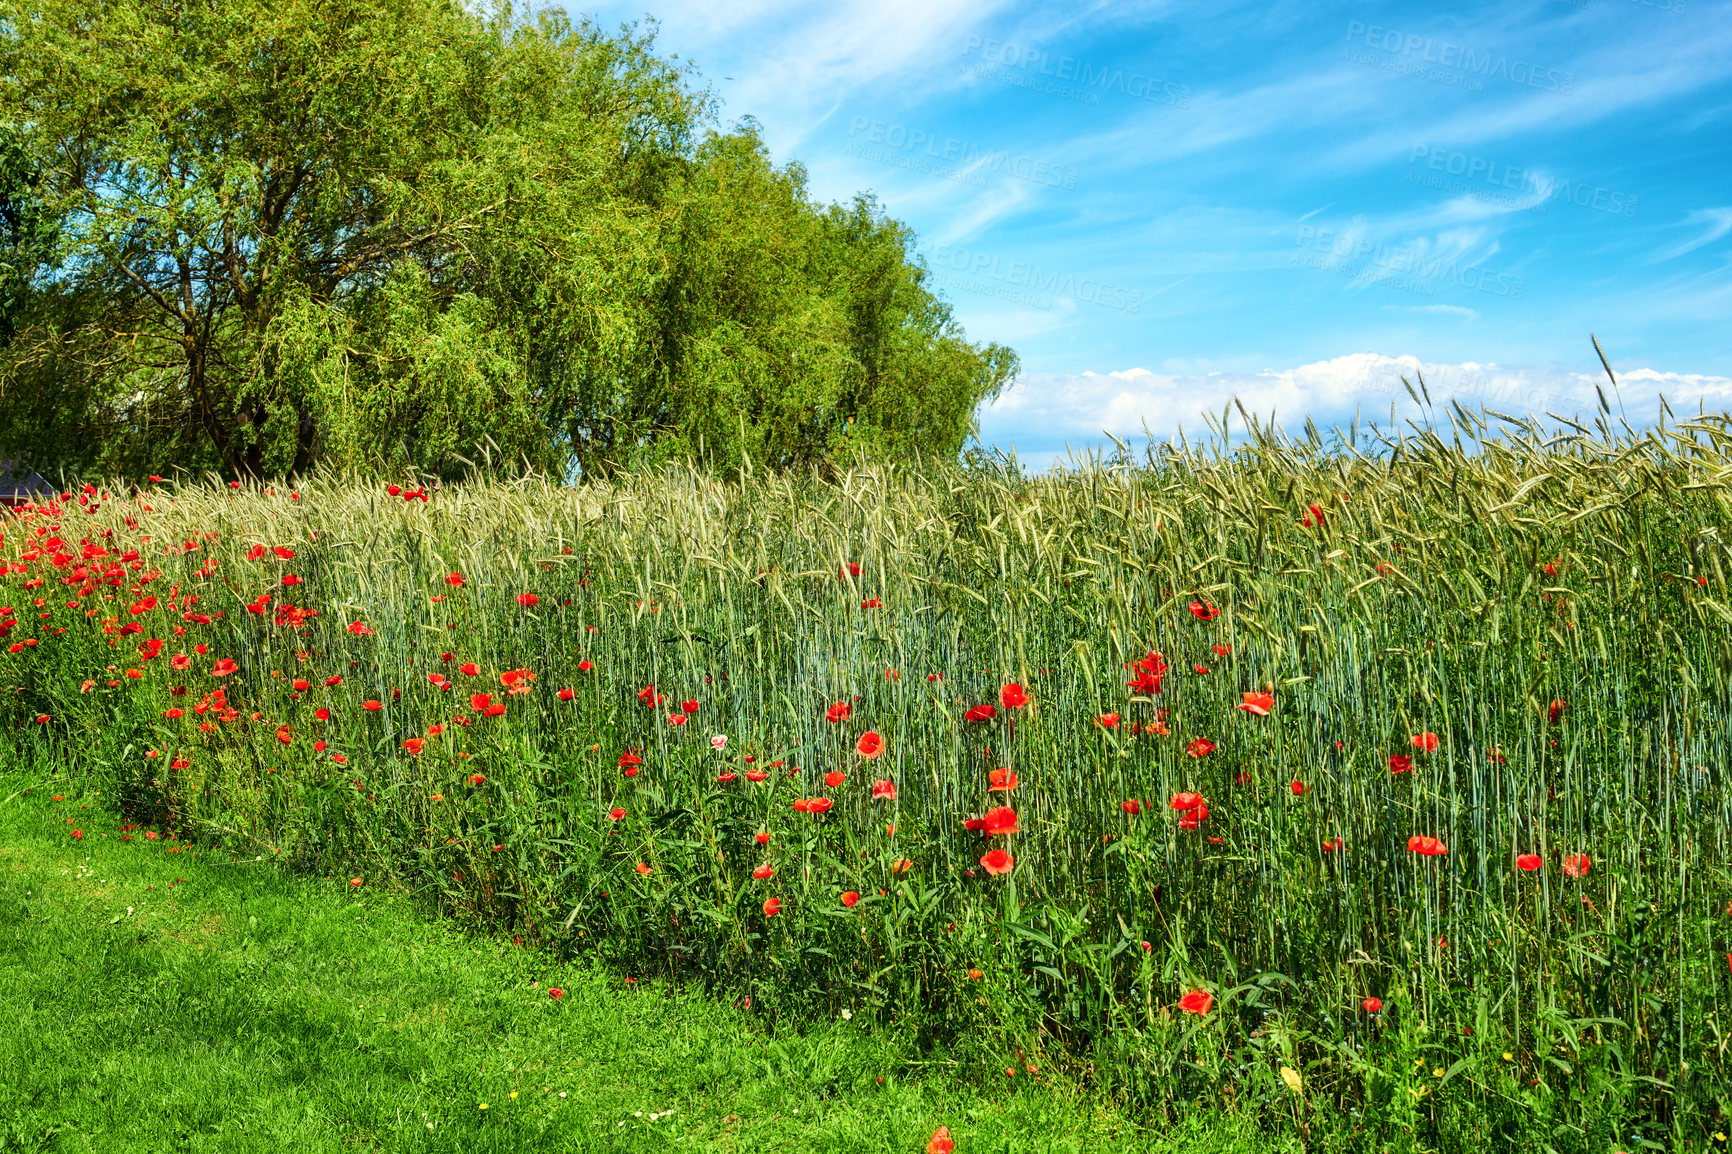 Buy stock photo A  photo of poppies in the countryside in early summer - Denmark